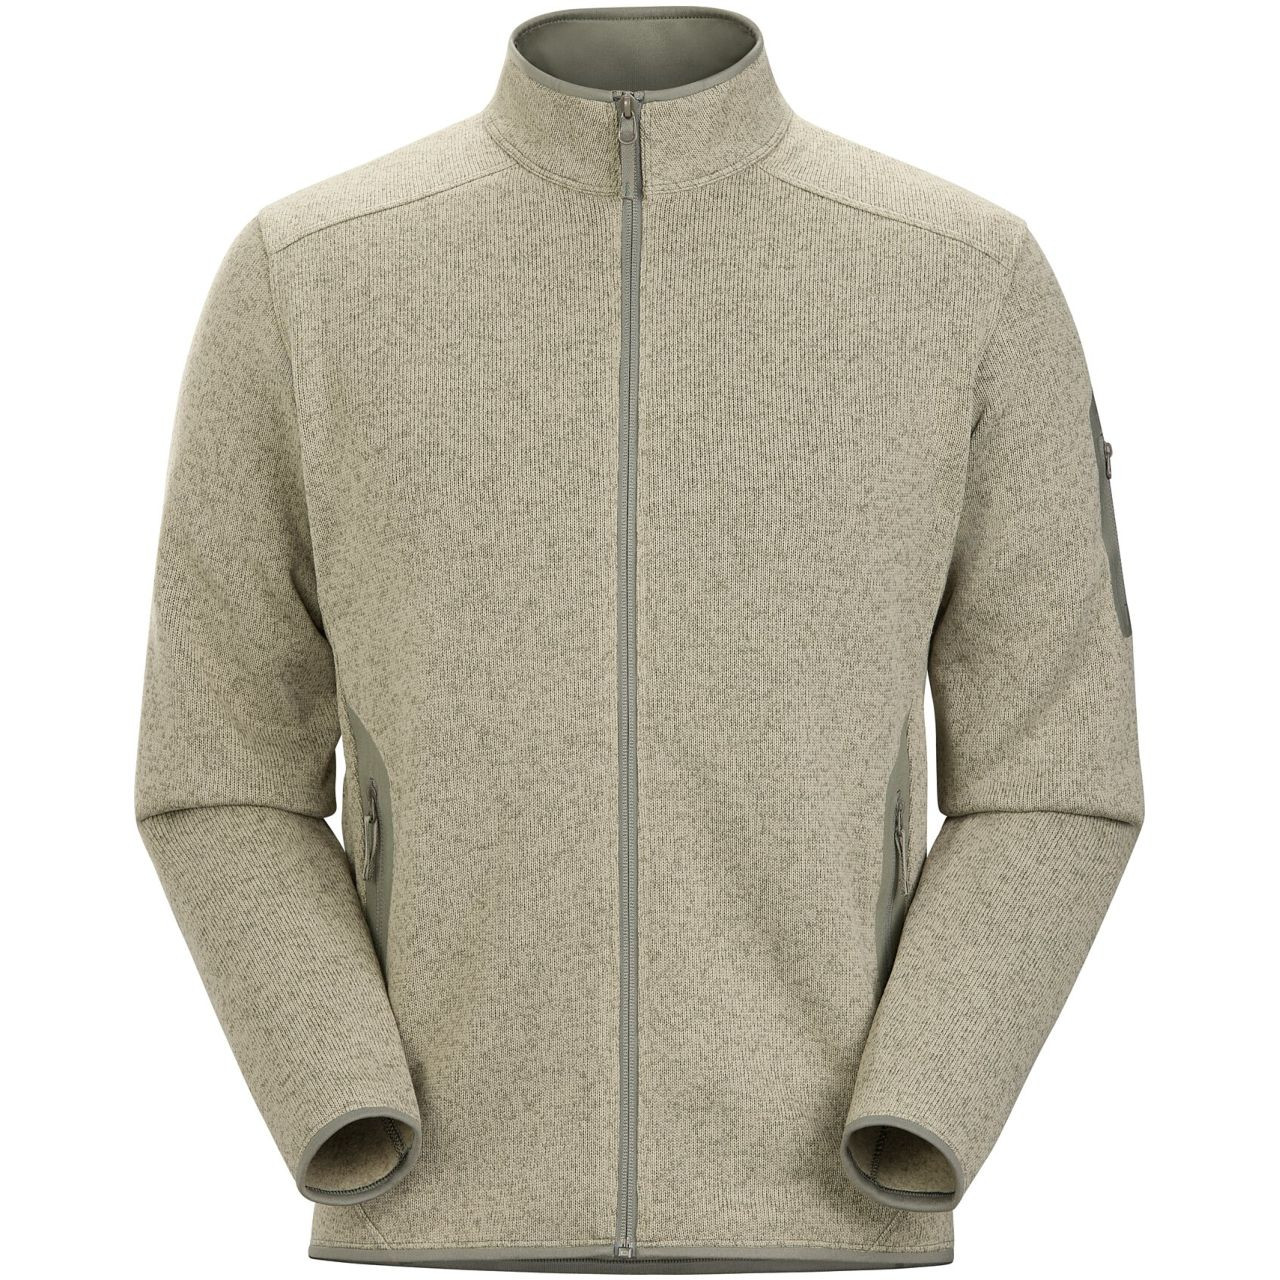 Covert cardigan: discontinued? Or will it be refreshed? : r/arcteryx